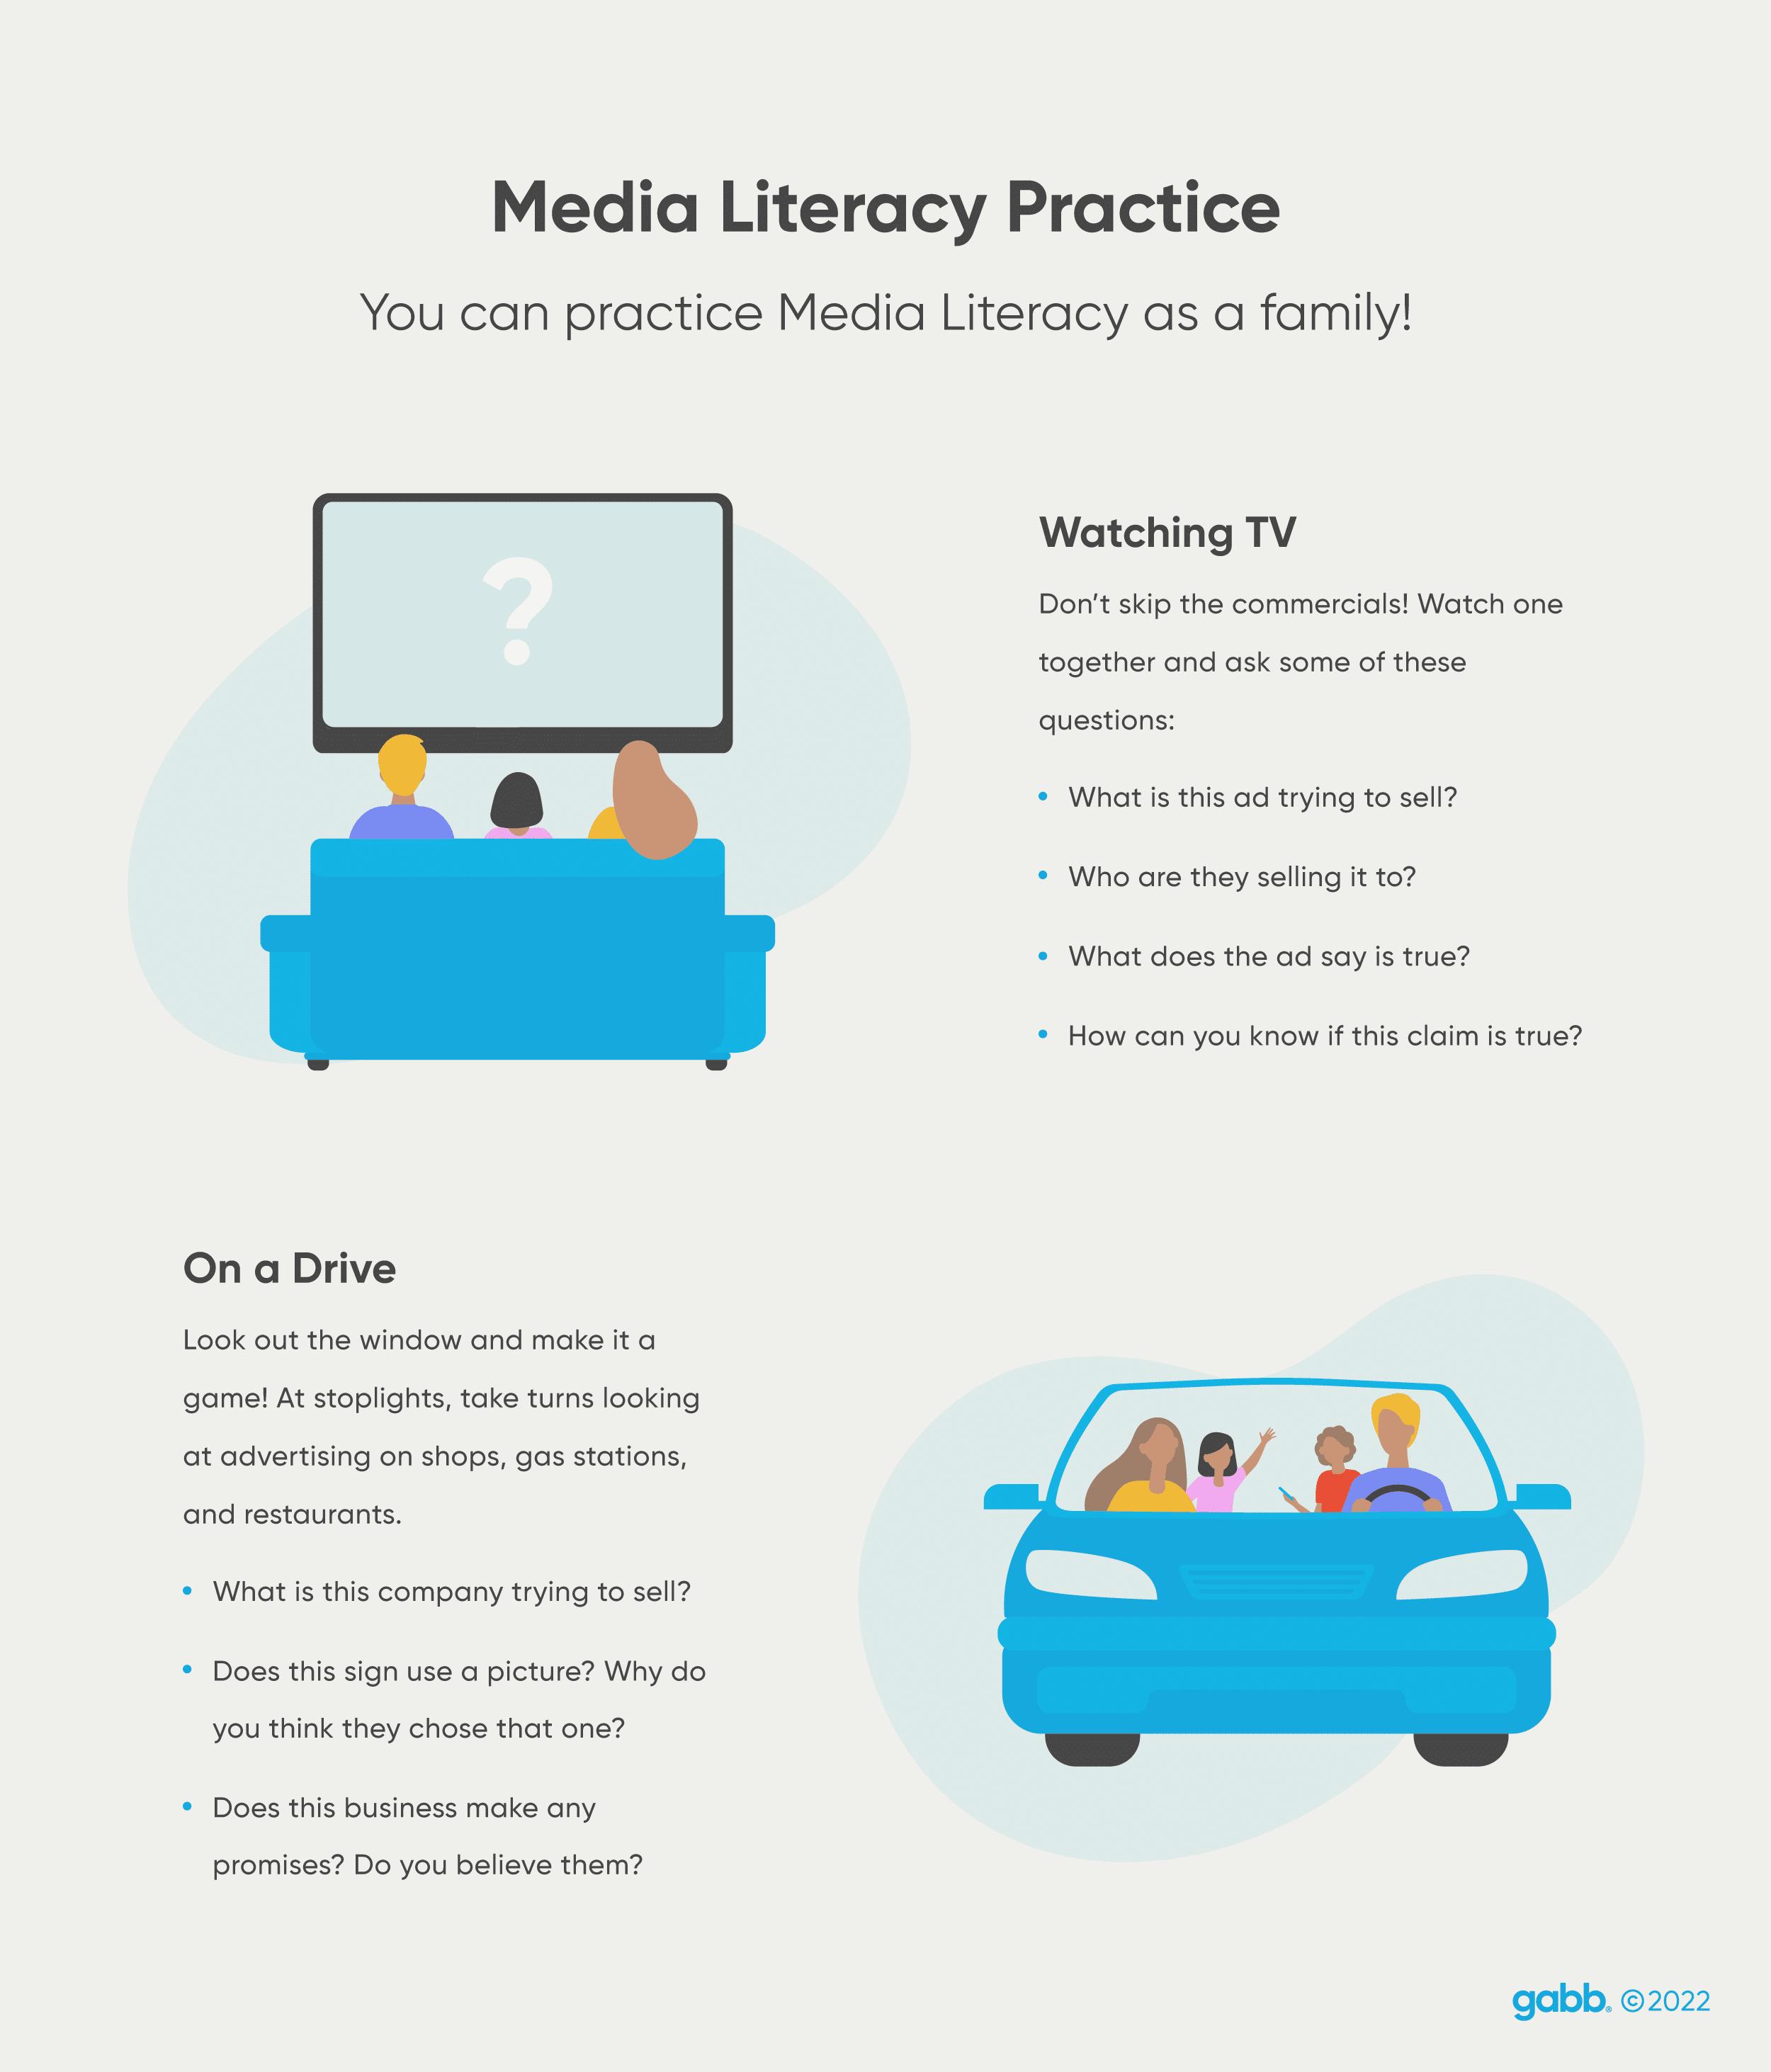 practice media literacy as a family on a drive or watching TV